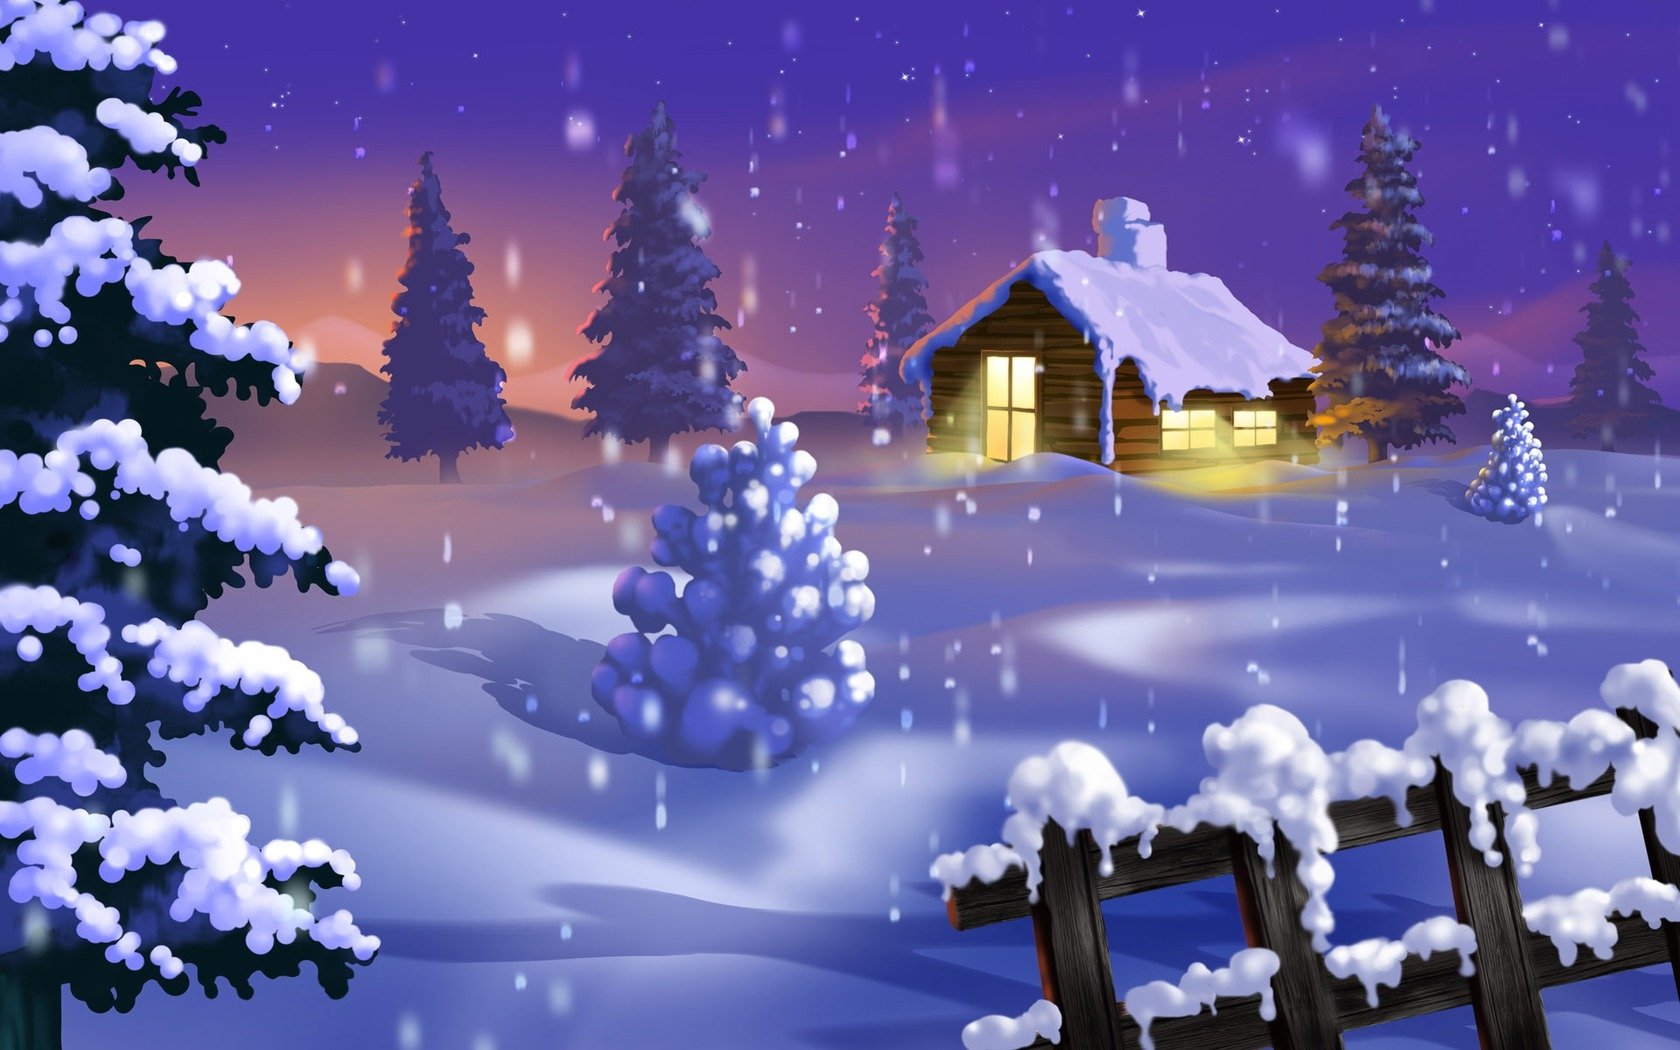 HD desktop wallpaper: Winter, Houses, Picture download free picture